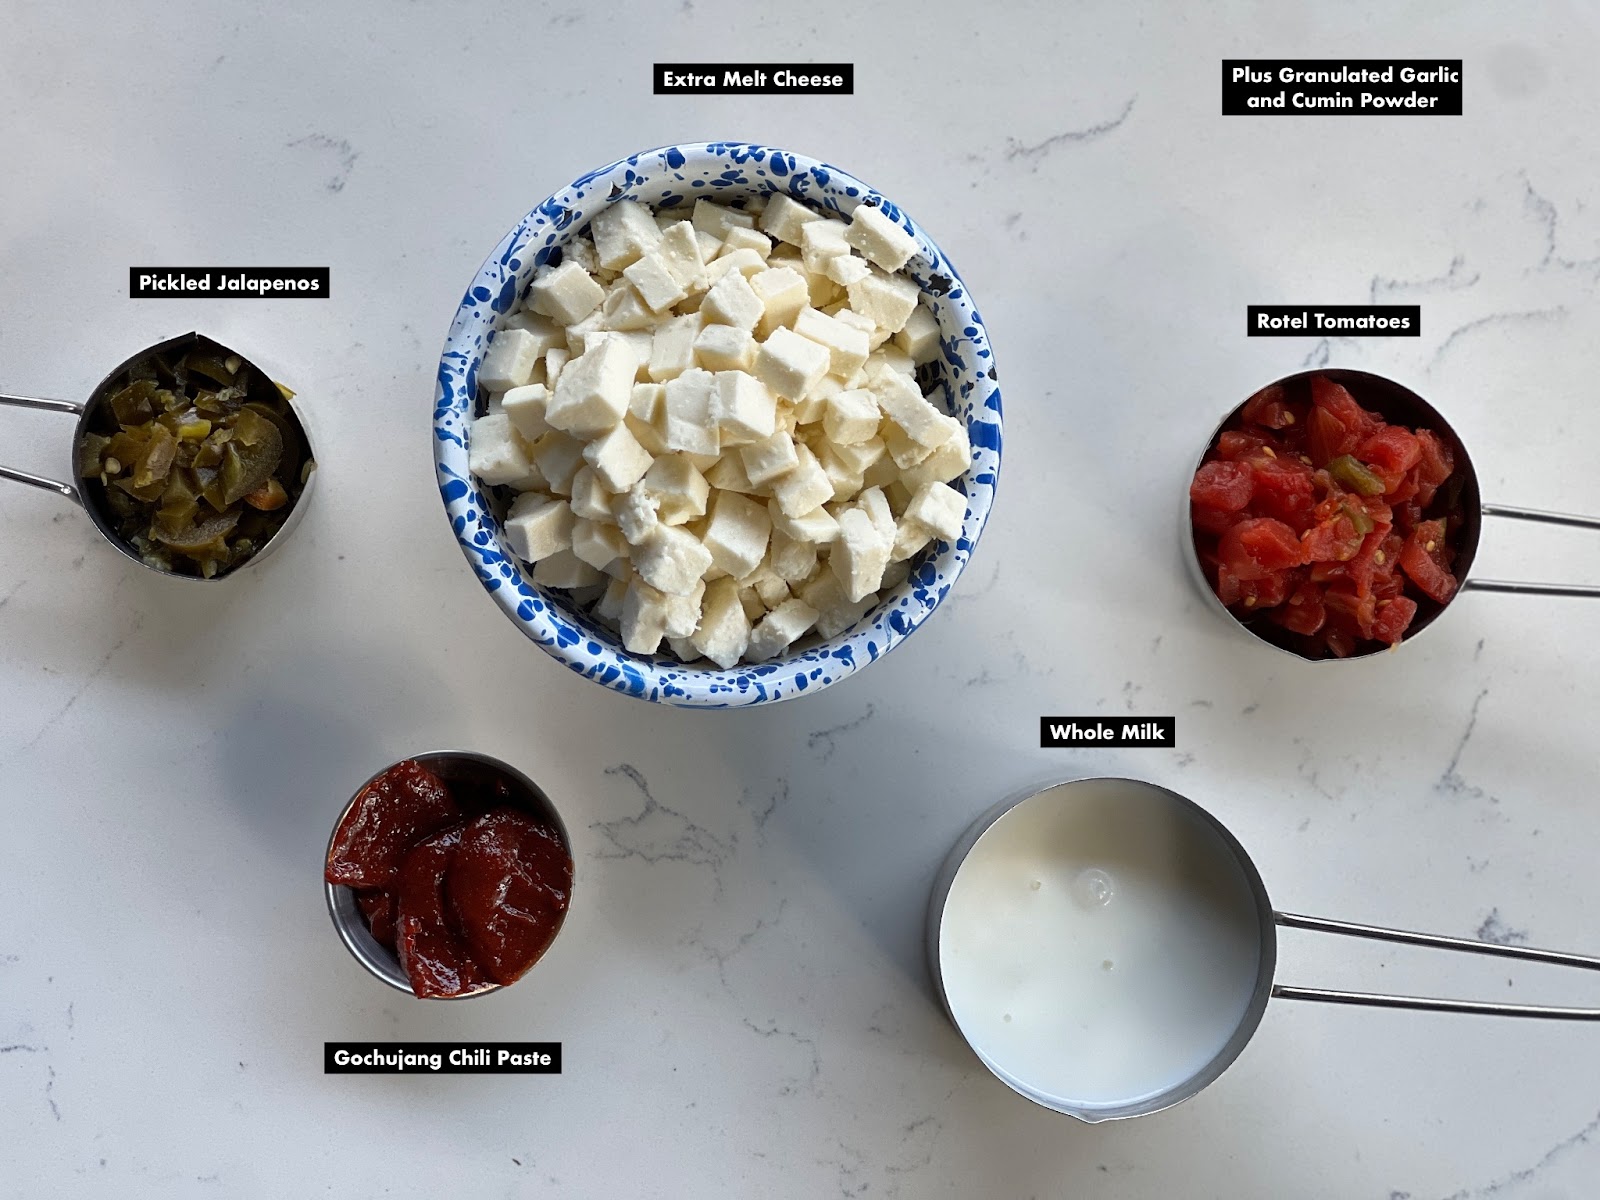 ingredients in the restaurant style queso recipe include cheese, jalapeños, chili paste or hot sauce, whole milk and ro-tel tomatoes